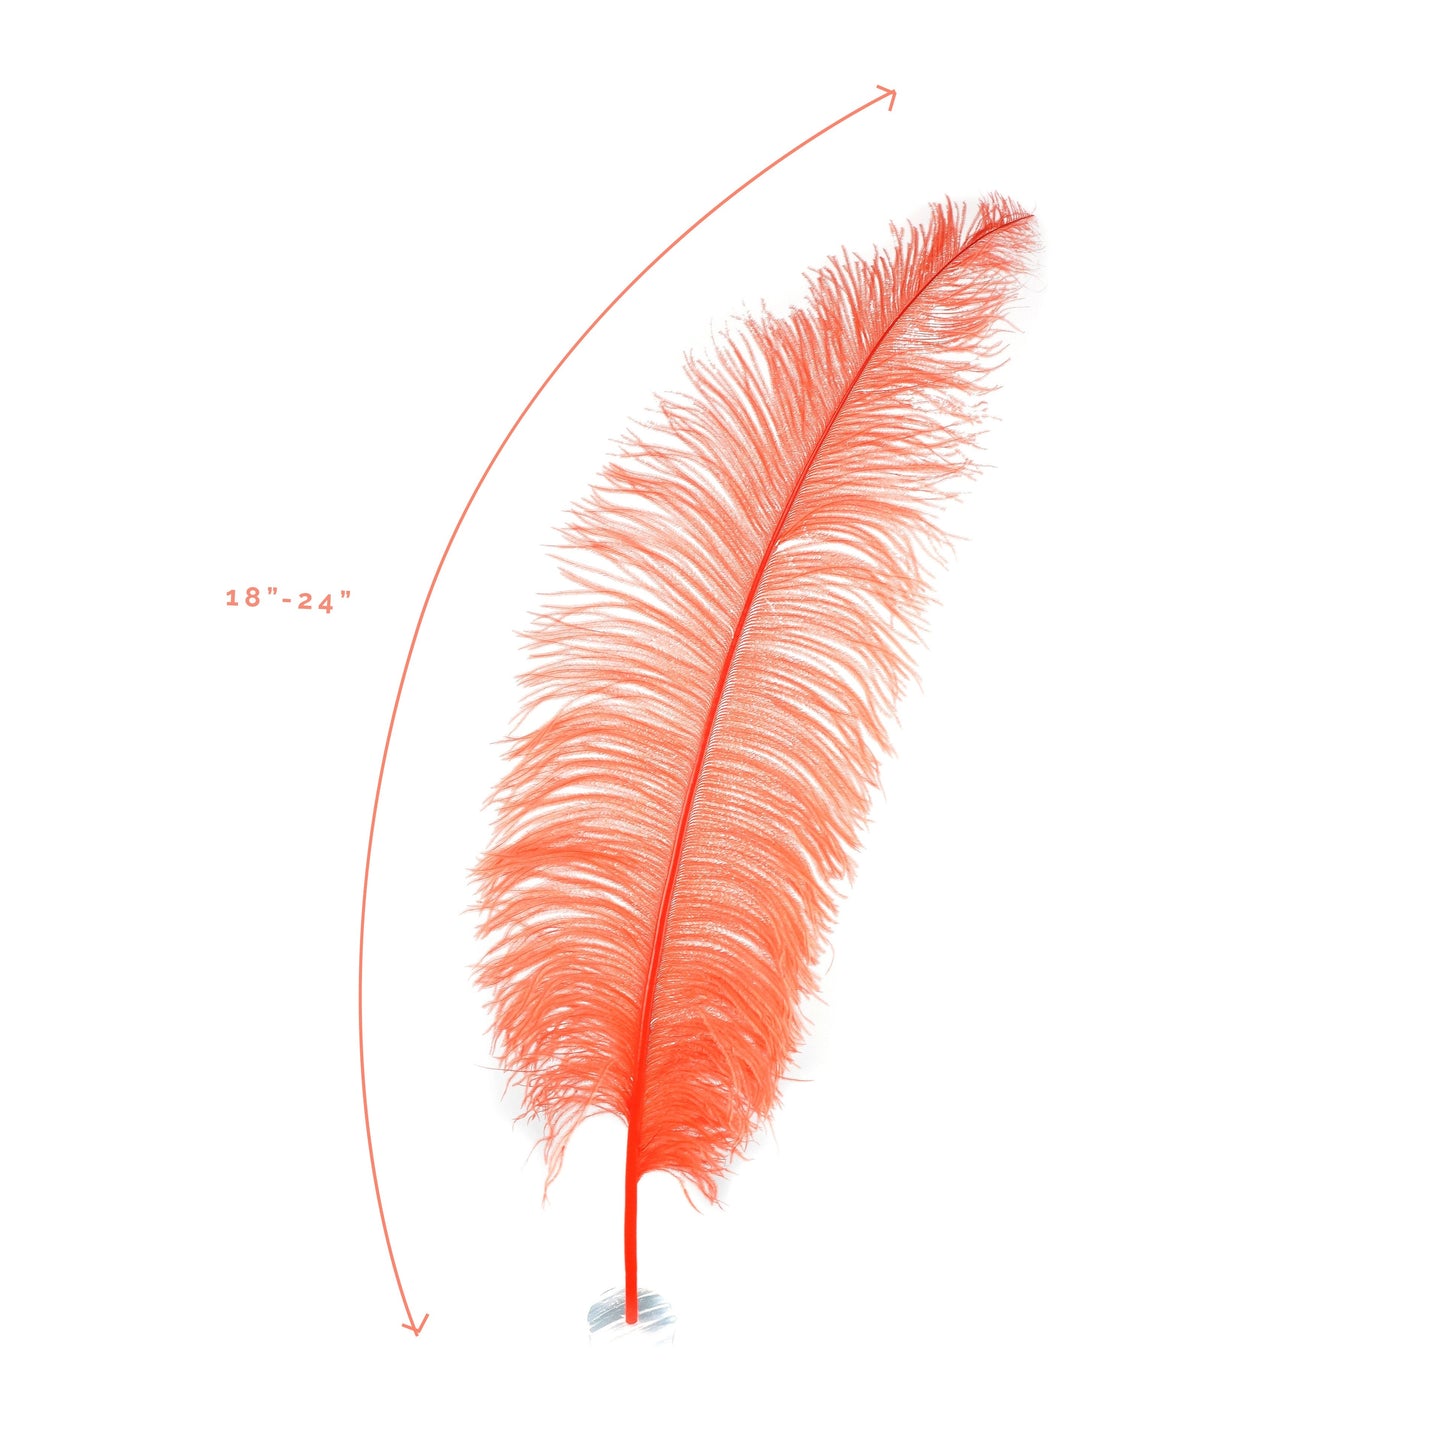 Ostrich Selected Spad Feathers [Premium Top Quality] Hot Orange